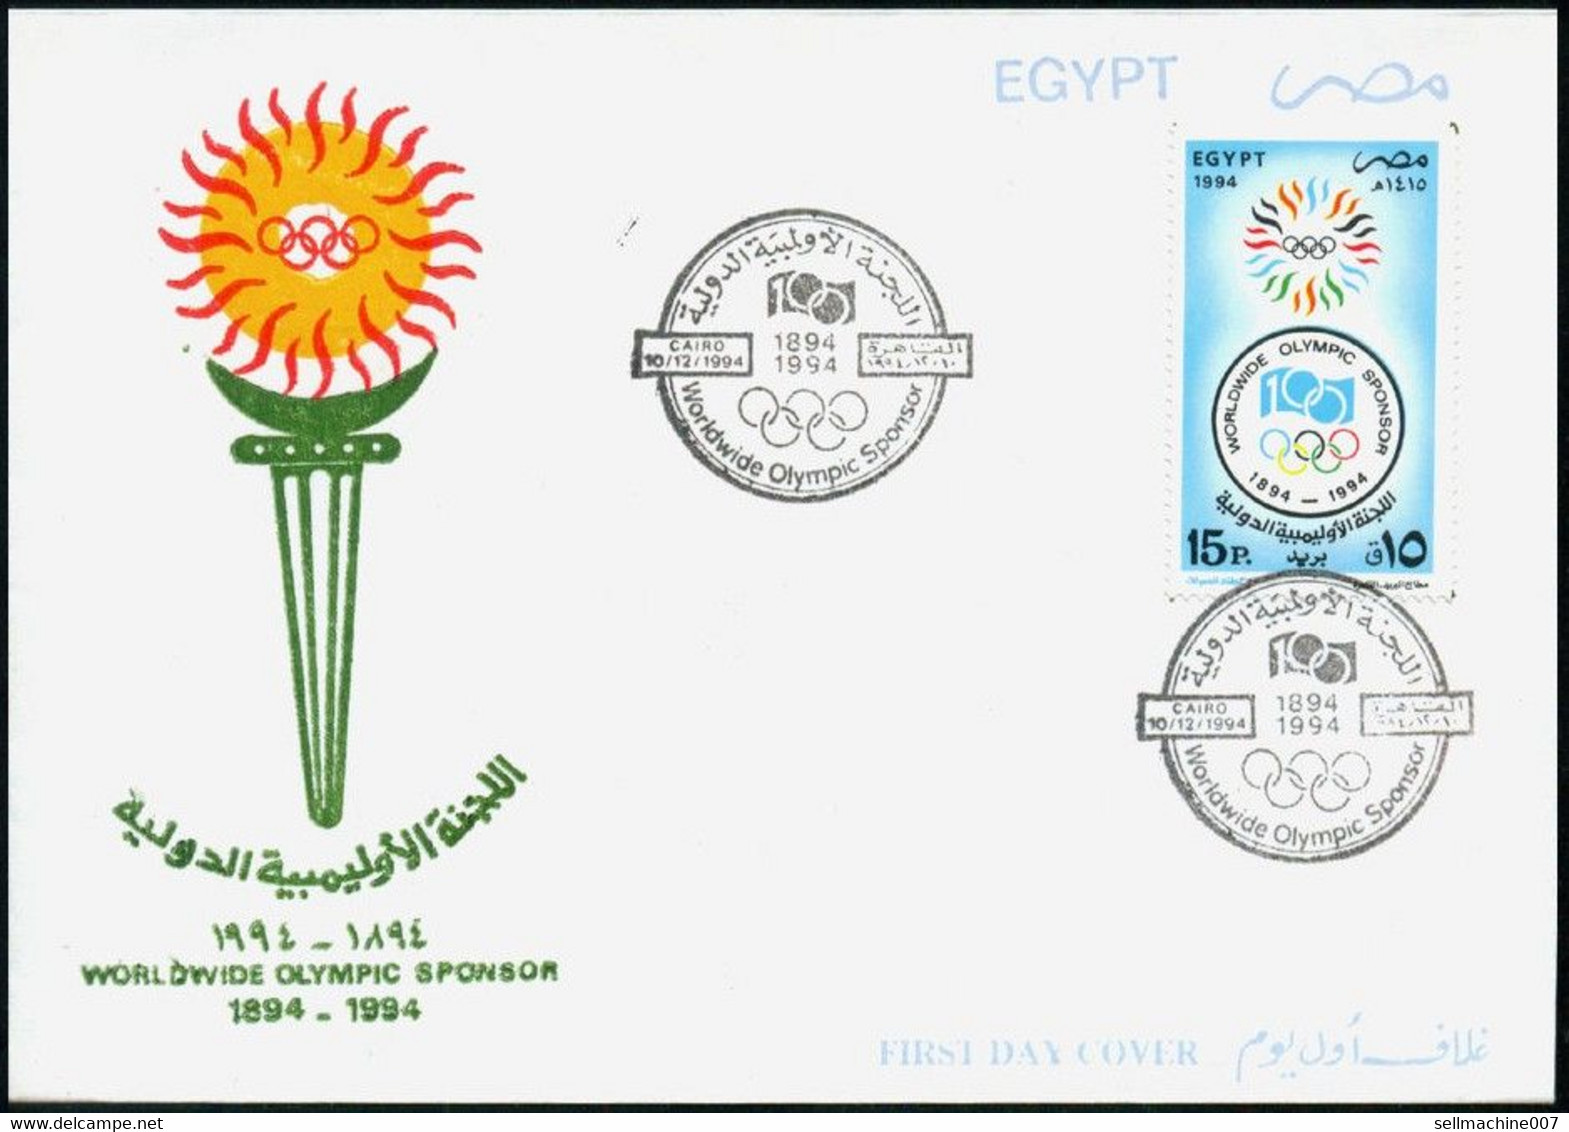 Egypt 1894 - 1994 First Day Cover - FDC 100 Years Worldwide Olympic Sponsor - Briefe U. Dokumente